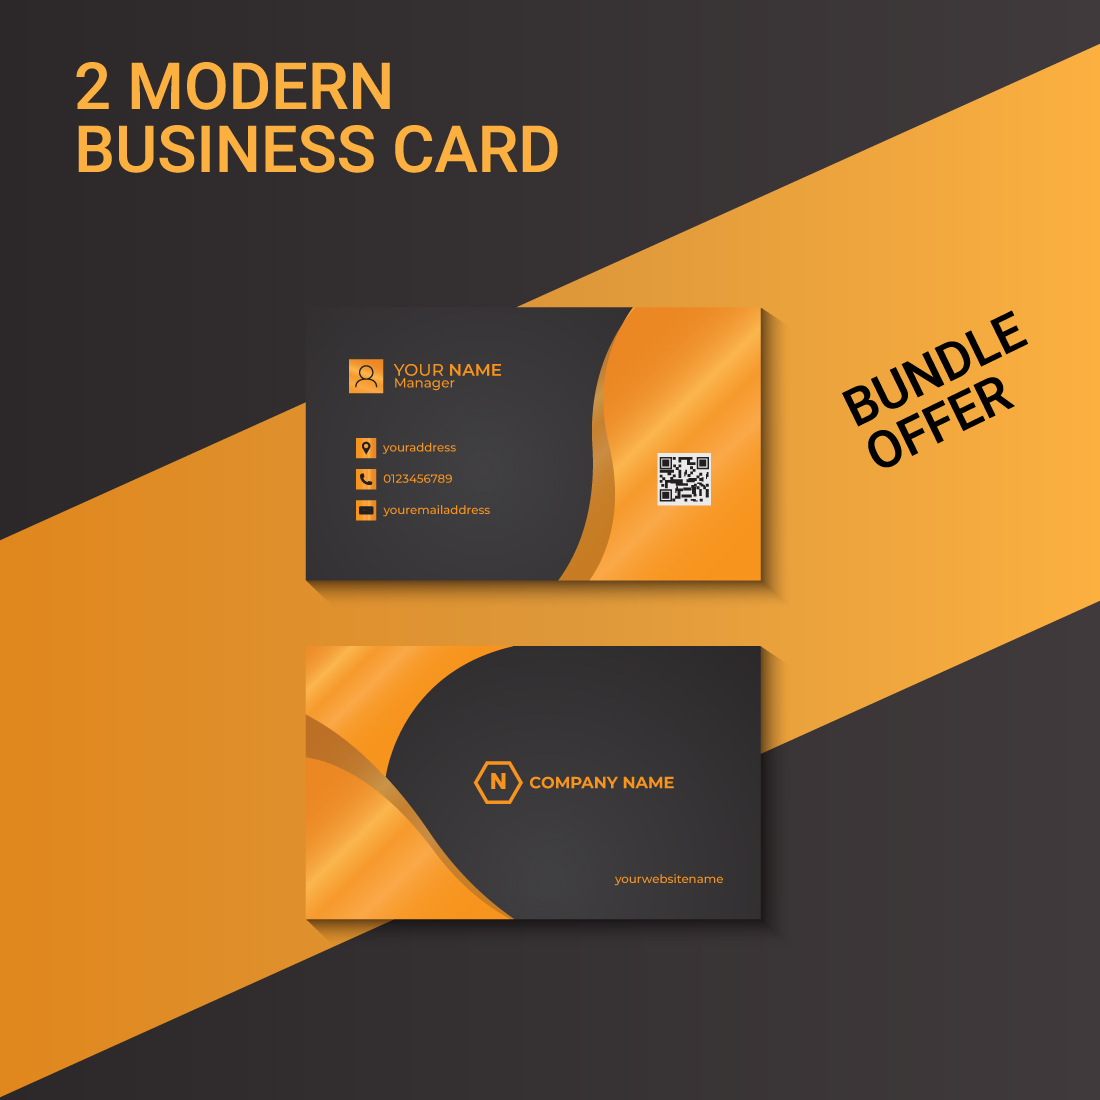 Two modern business cards with a black and yellow design.